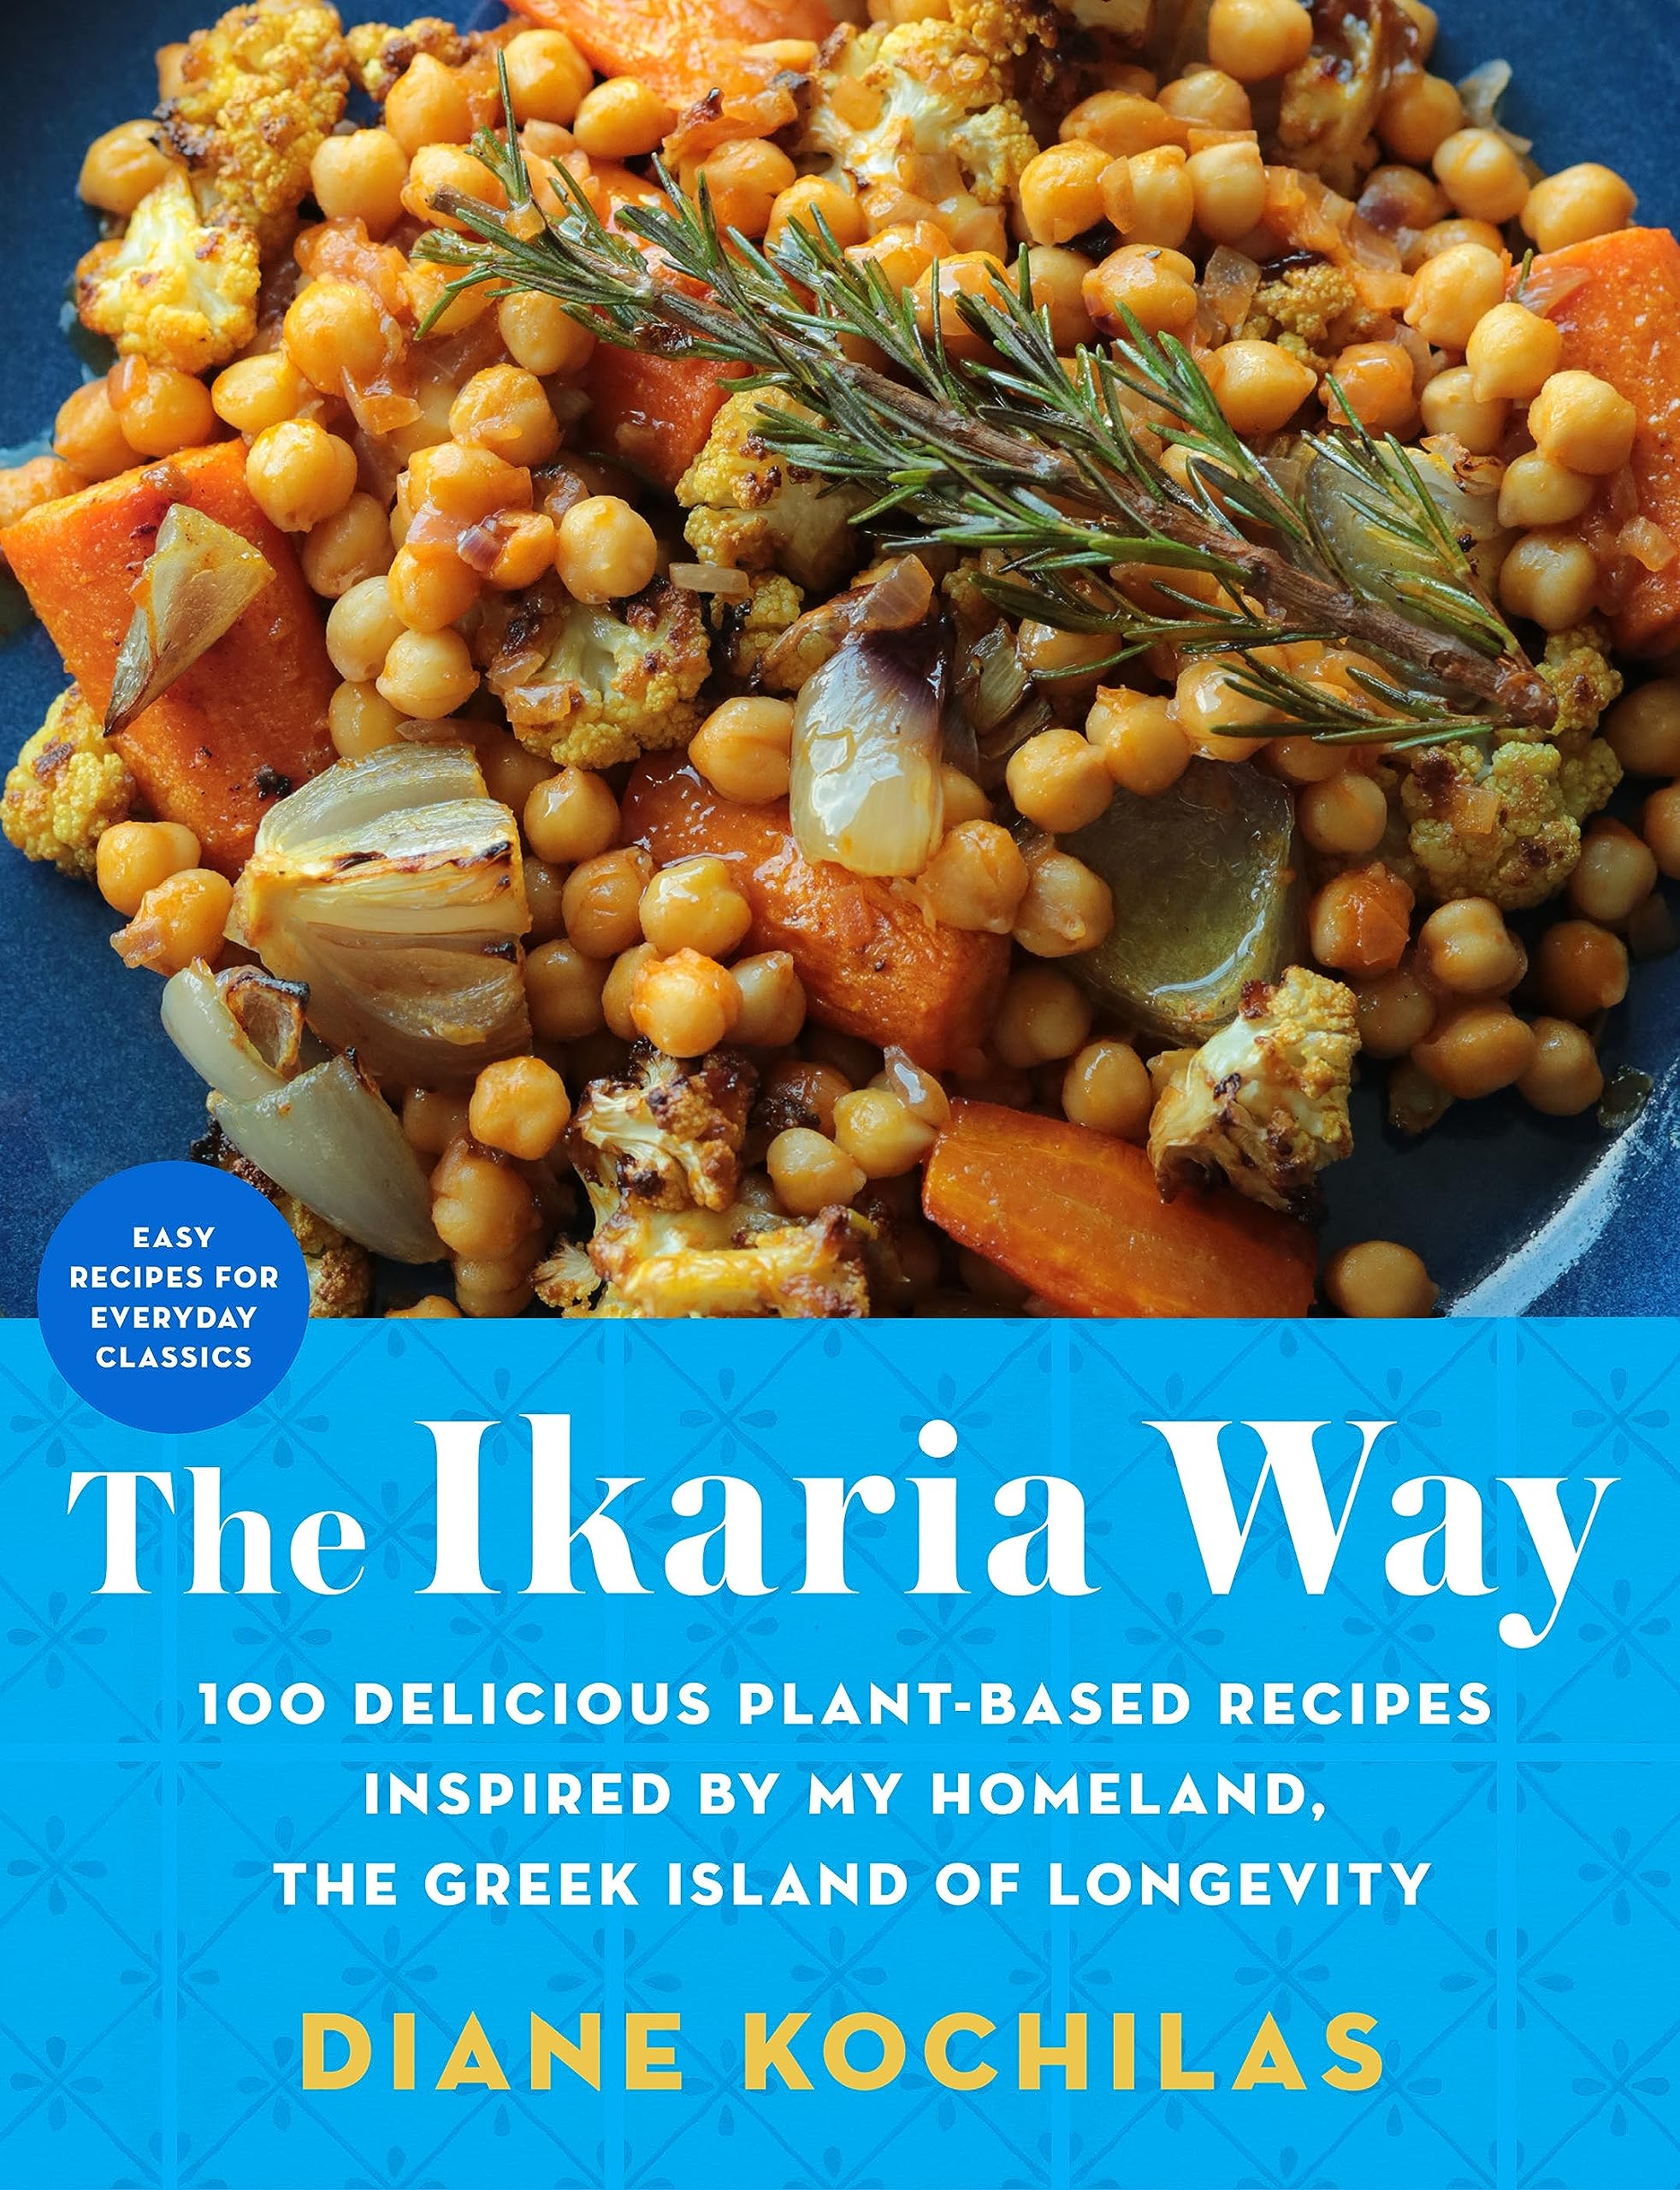 The Ikaria Way: 100 Delicious Plant-Based Recipes Inspired by My Homeland, the Greek Island of Longevity